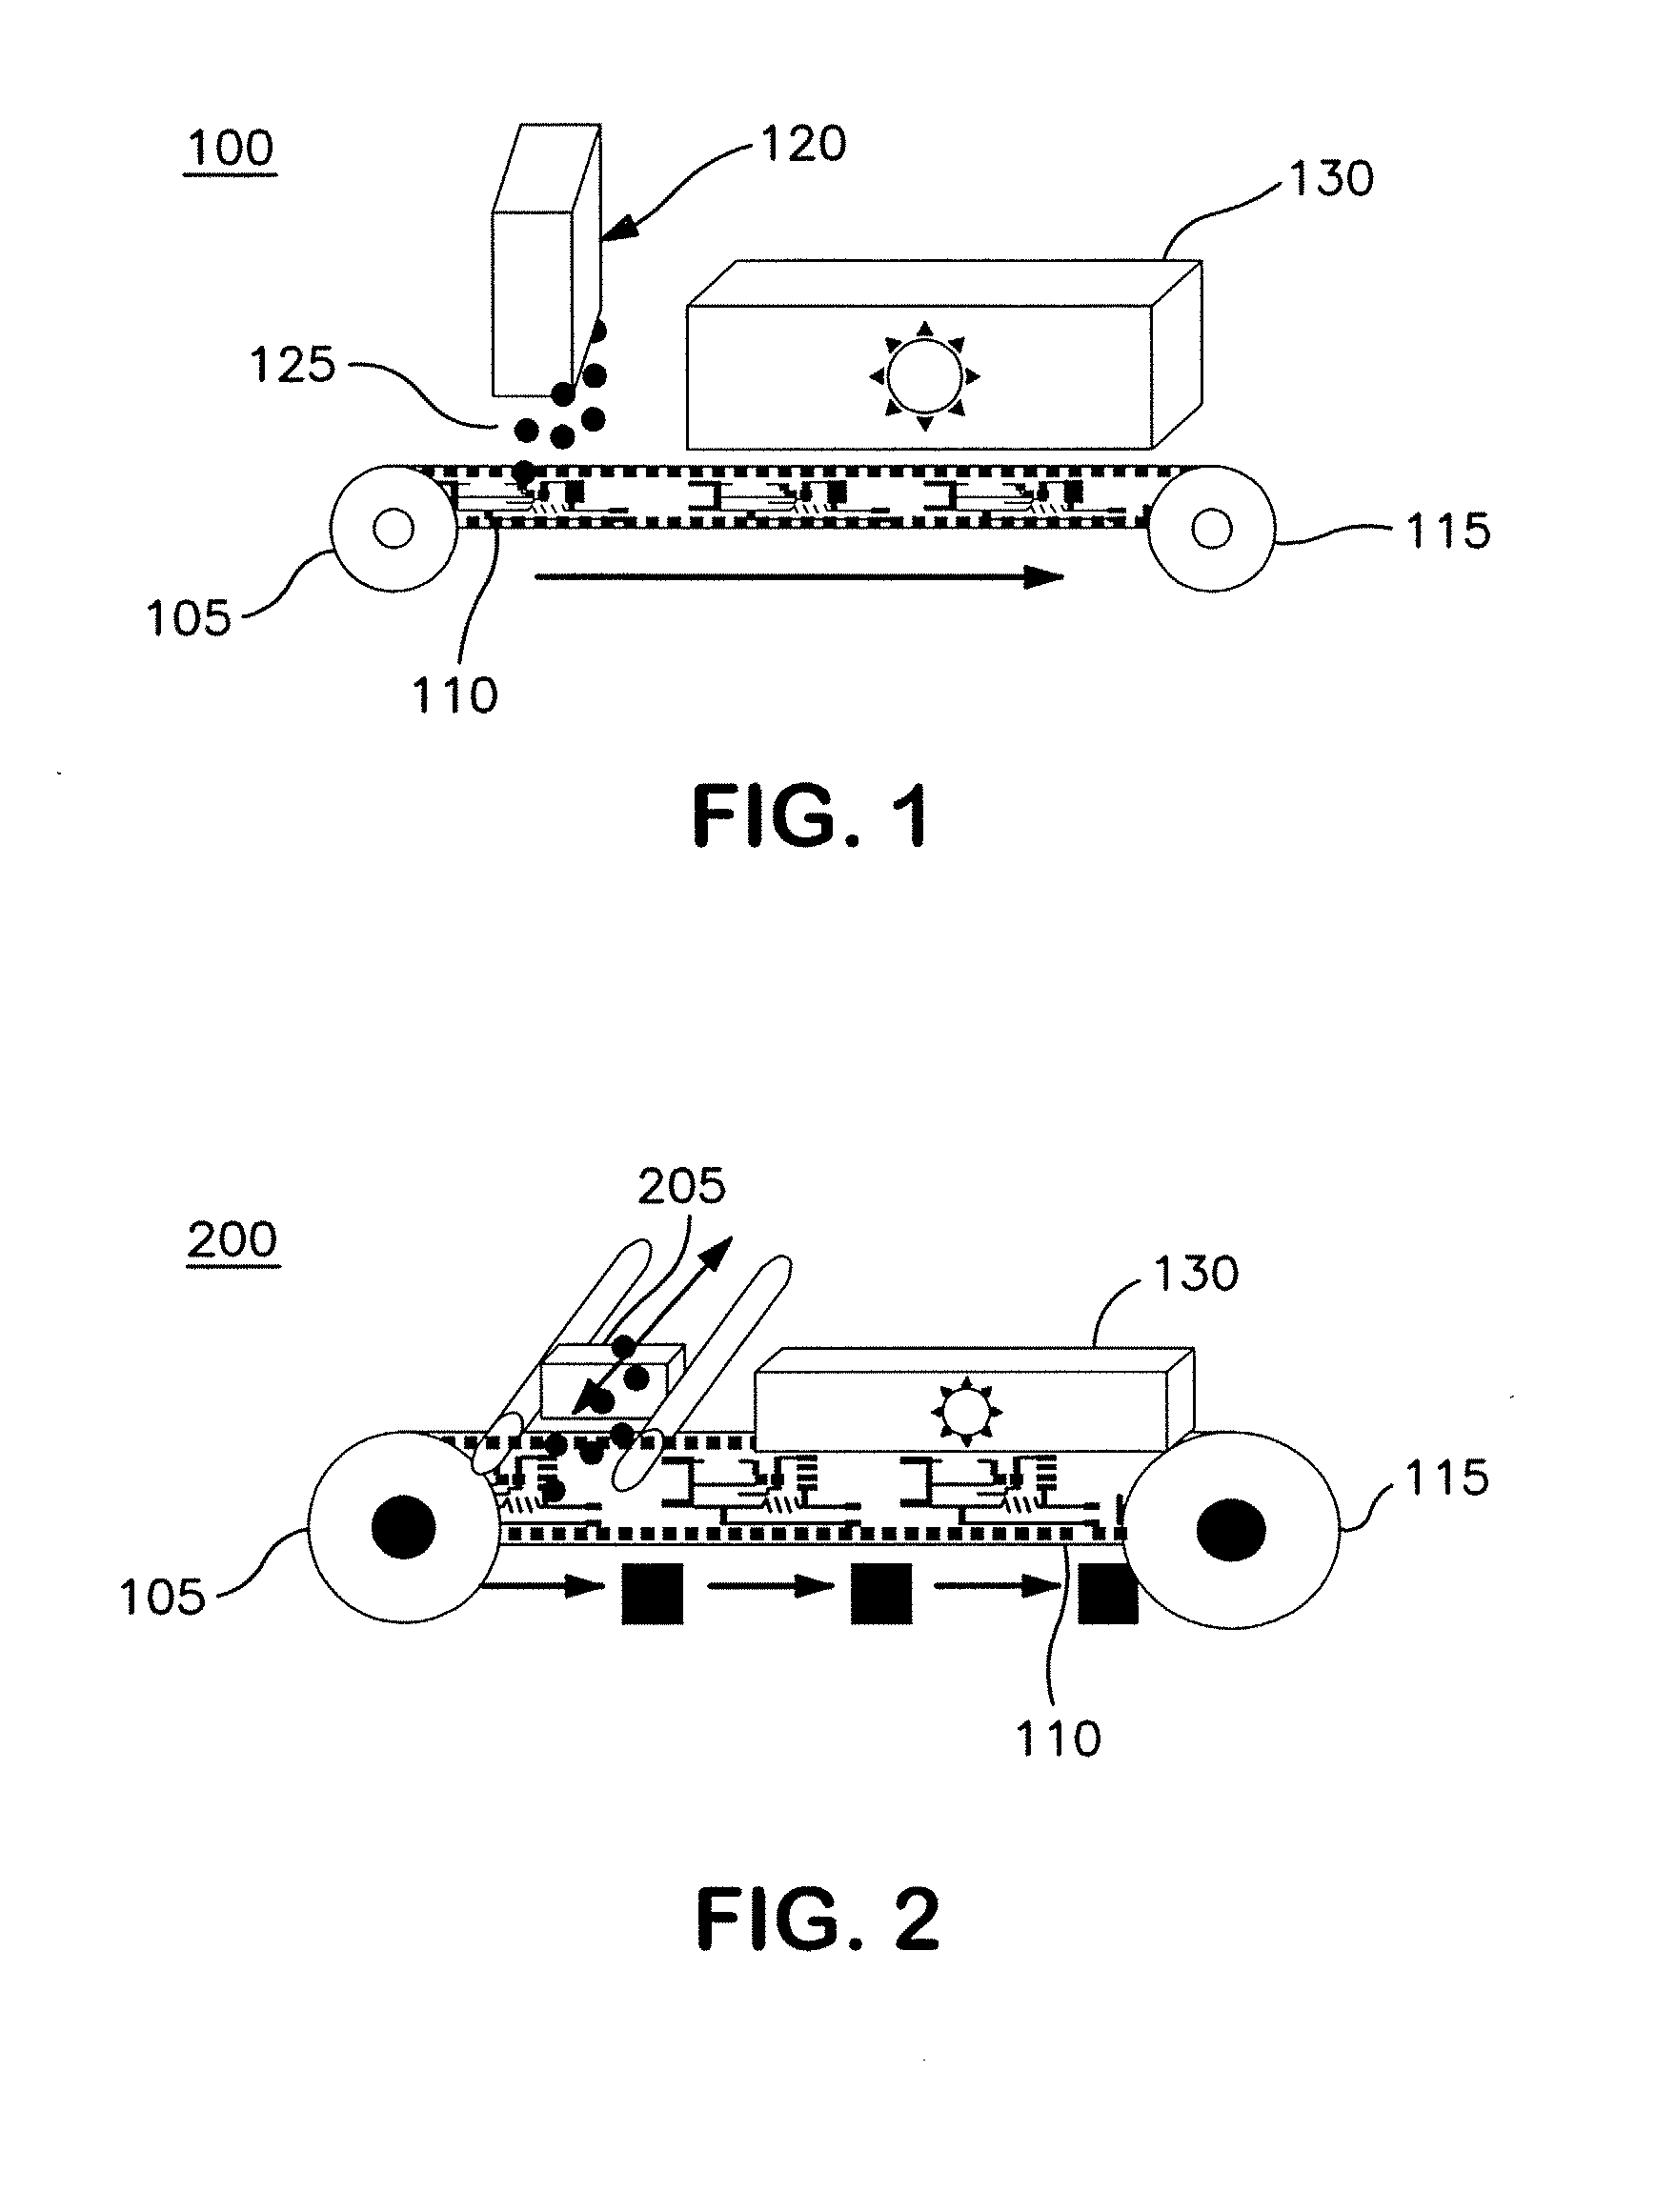 Roll-to-roll manufacturing of electronic and optical materials